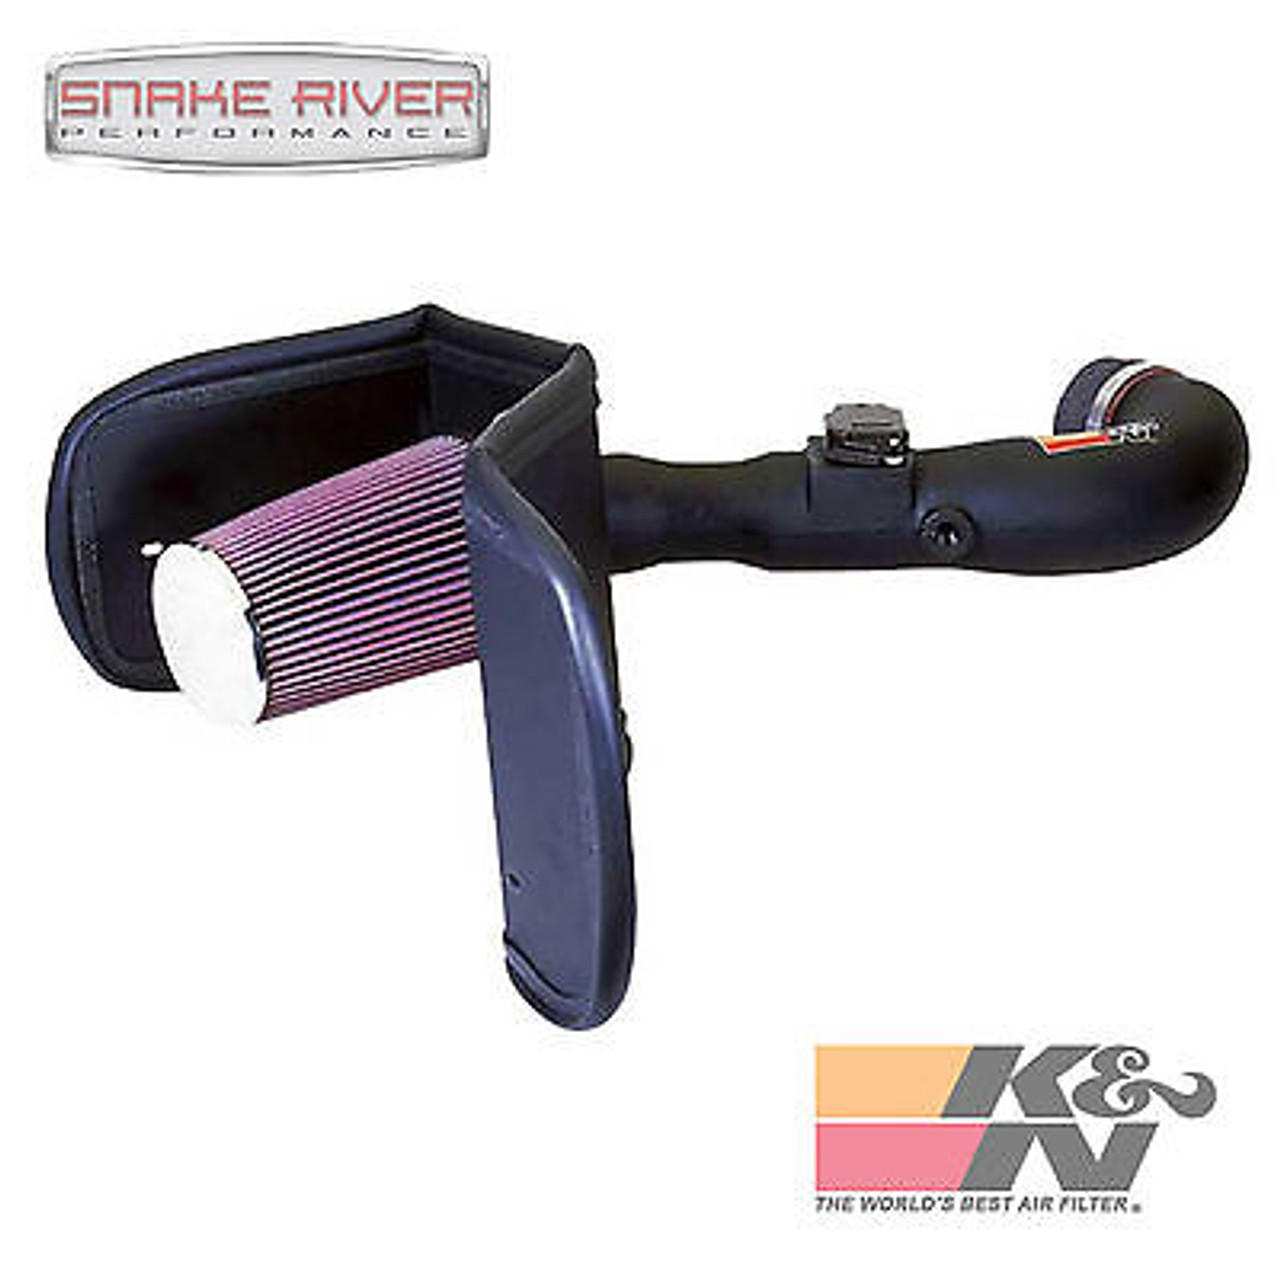 63-9022 - K&N PERFORMANCE COLD AIR INTAKE SYSTEM FOR 03-04 TOYOTA 4 RUNNER 4.7L NON CARB